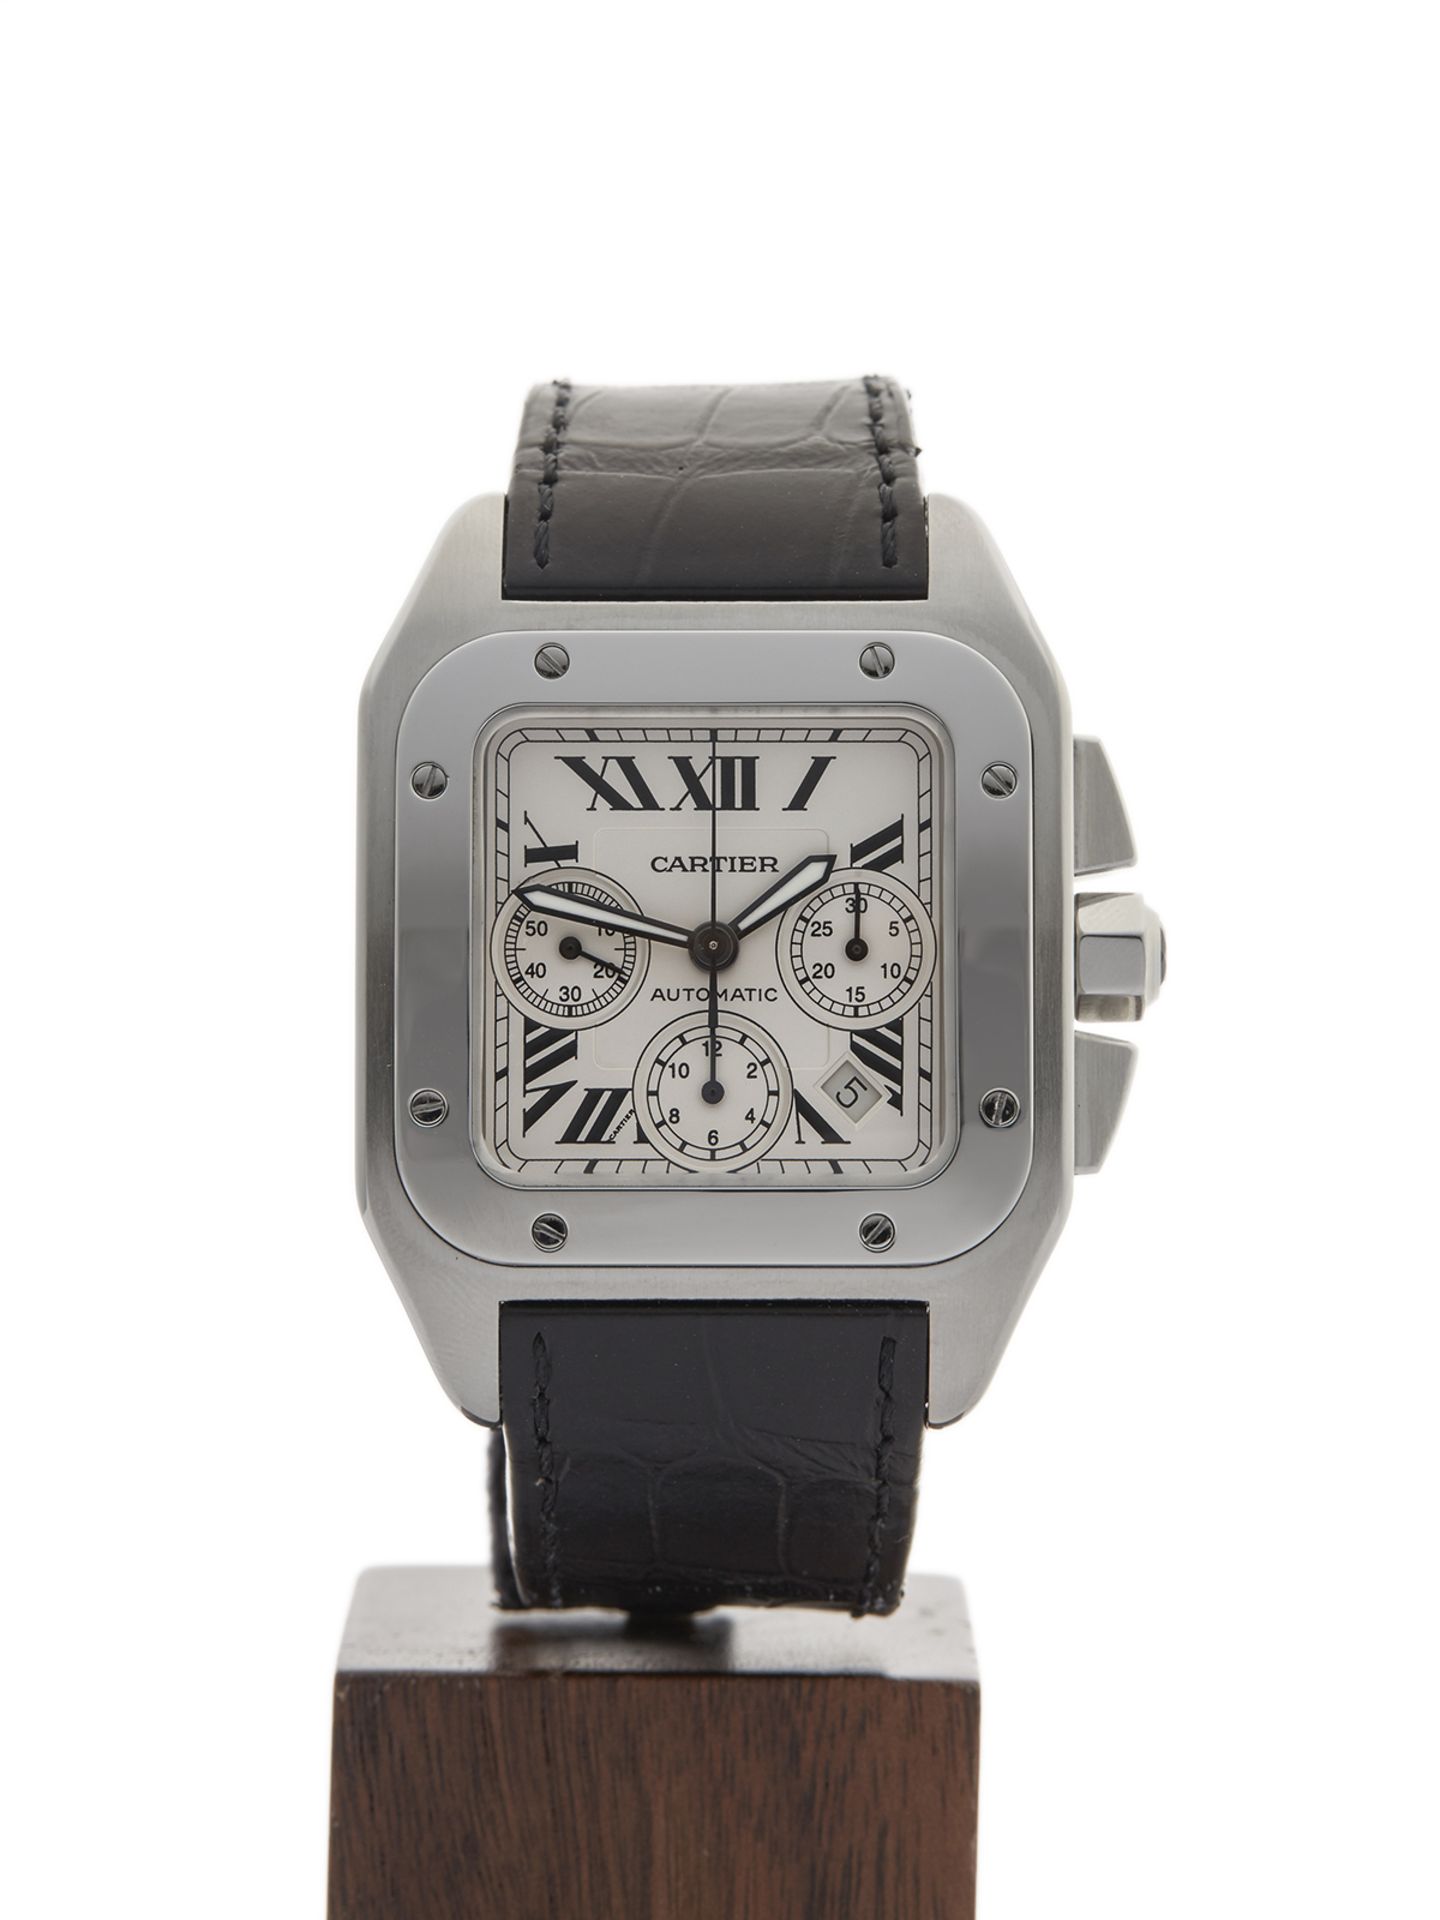 Cartier Santos 100 XL Chronograph 41mm Stainless Steel 2740 or W20090X8 - Image 2 of 9